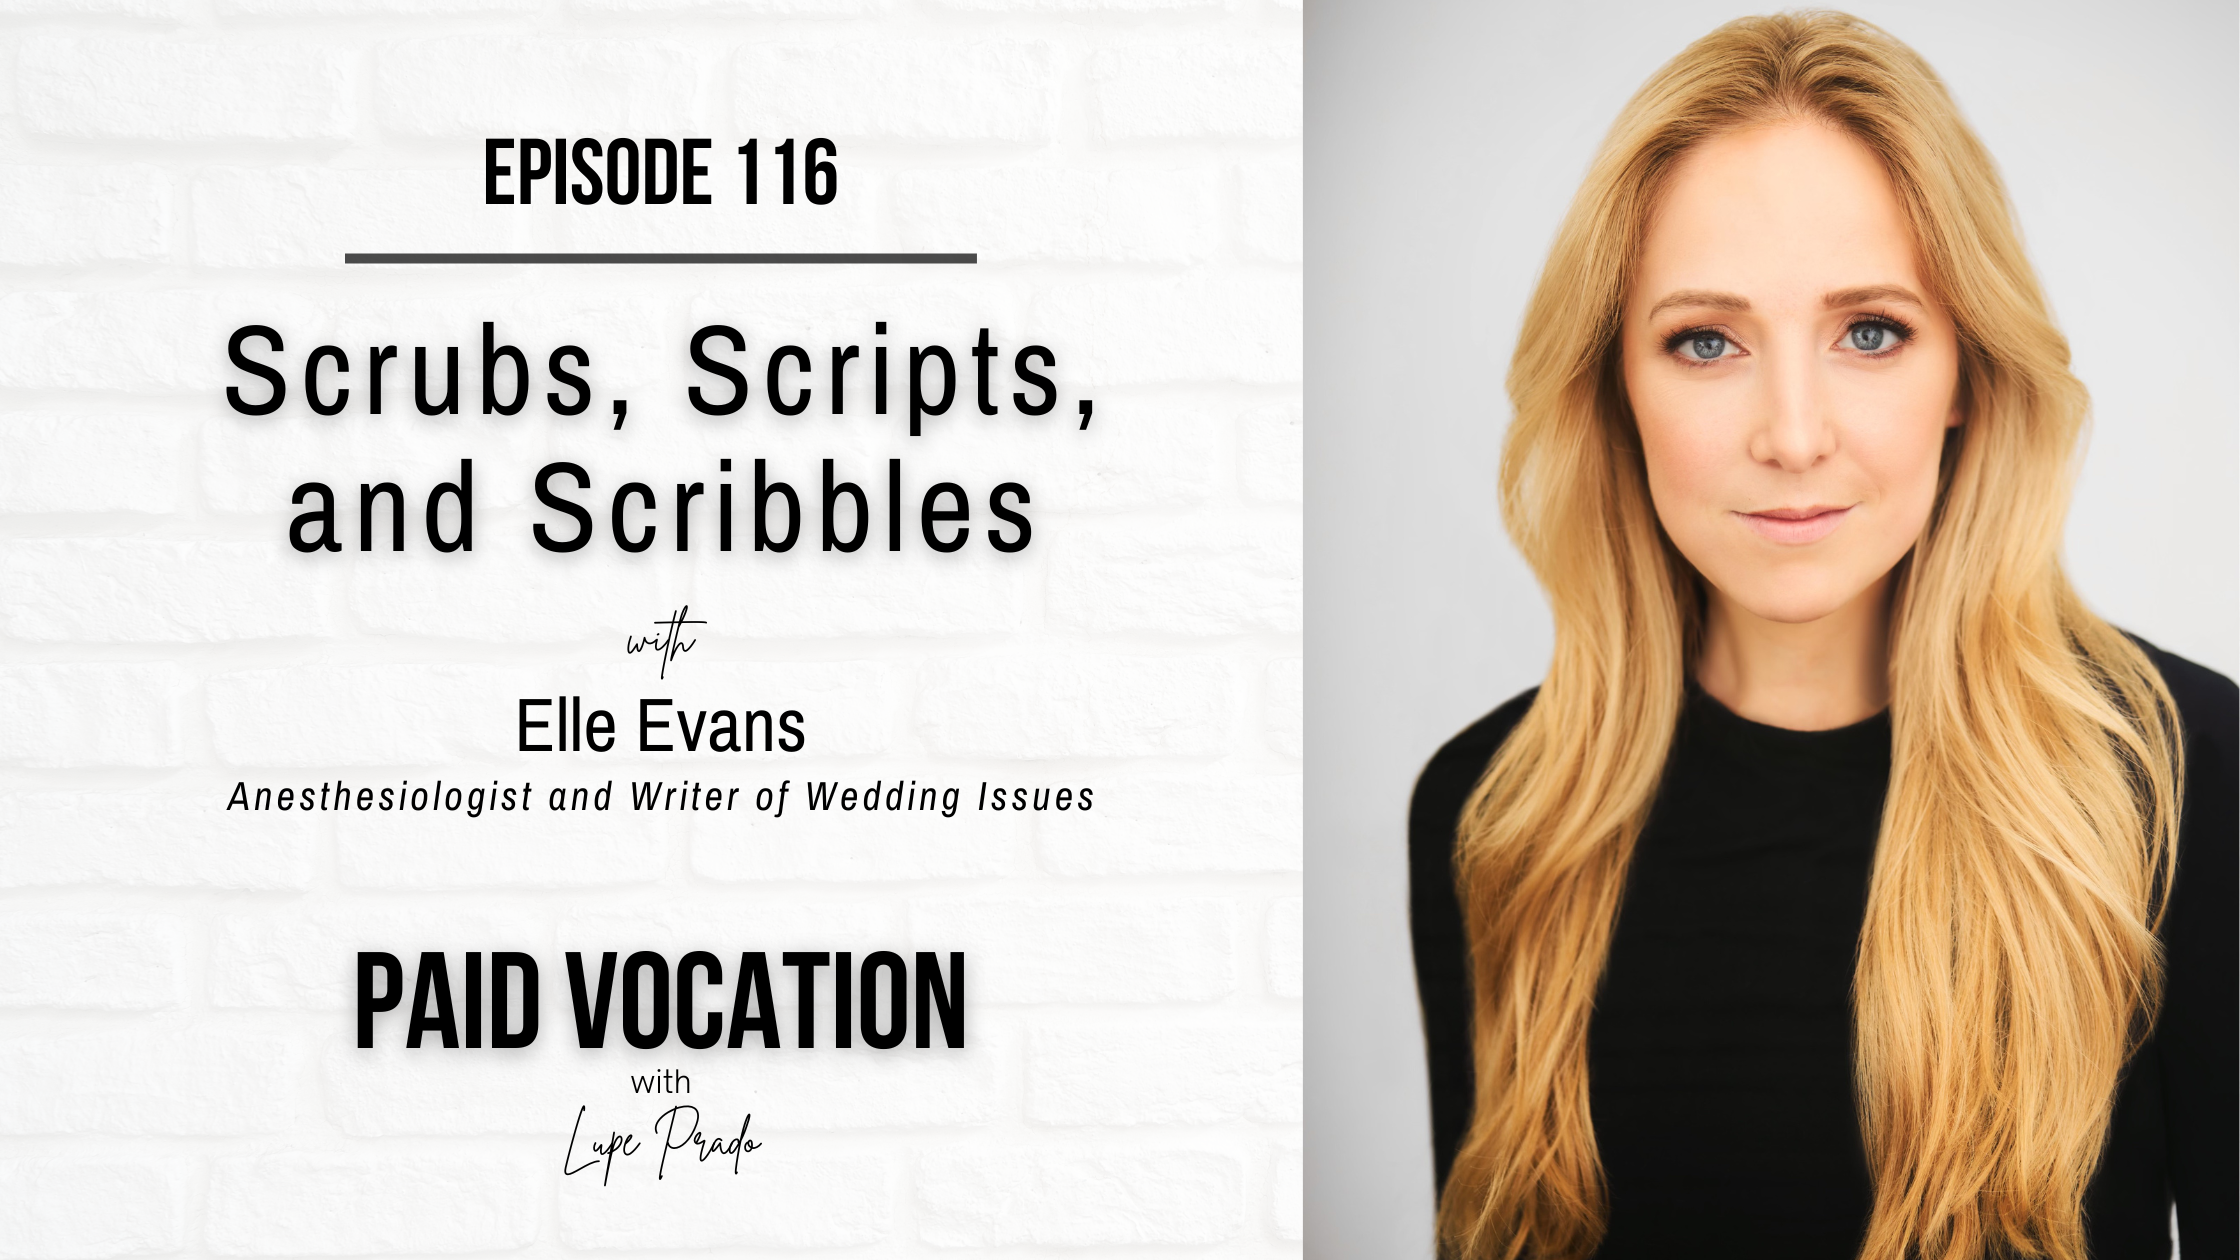 Scrubs, Scripts, and Scribbles with Elle Evans